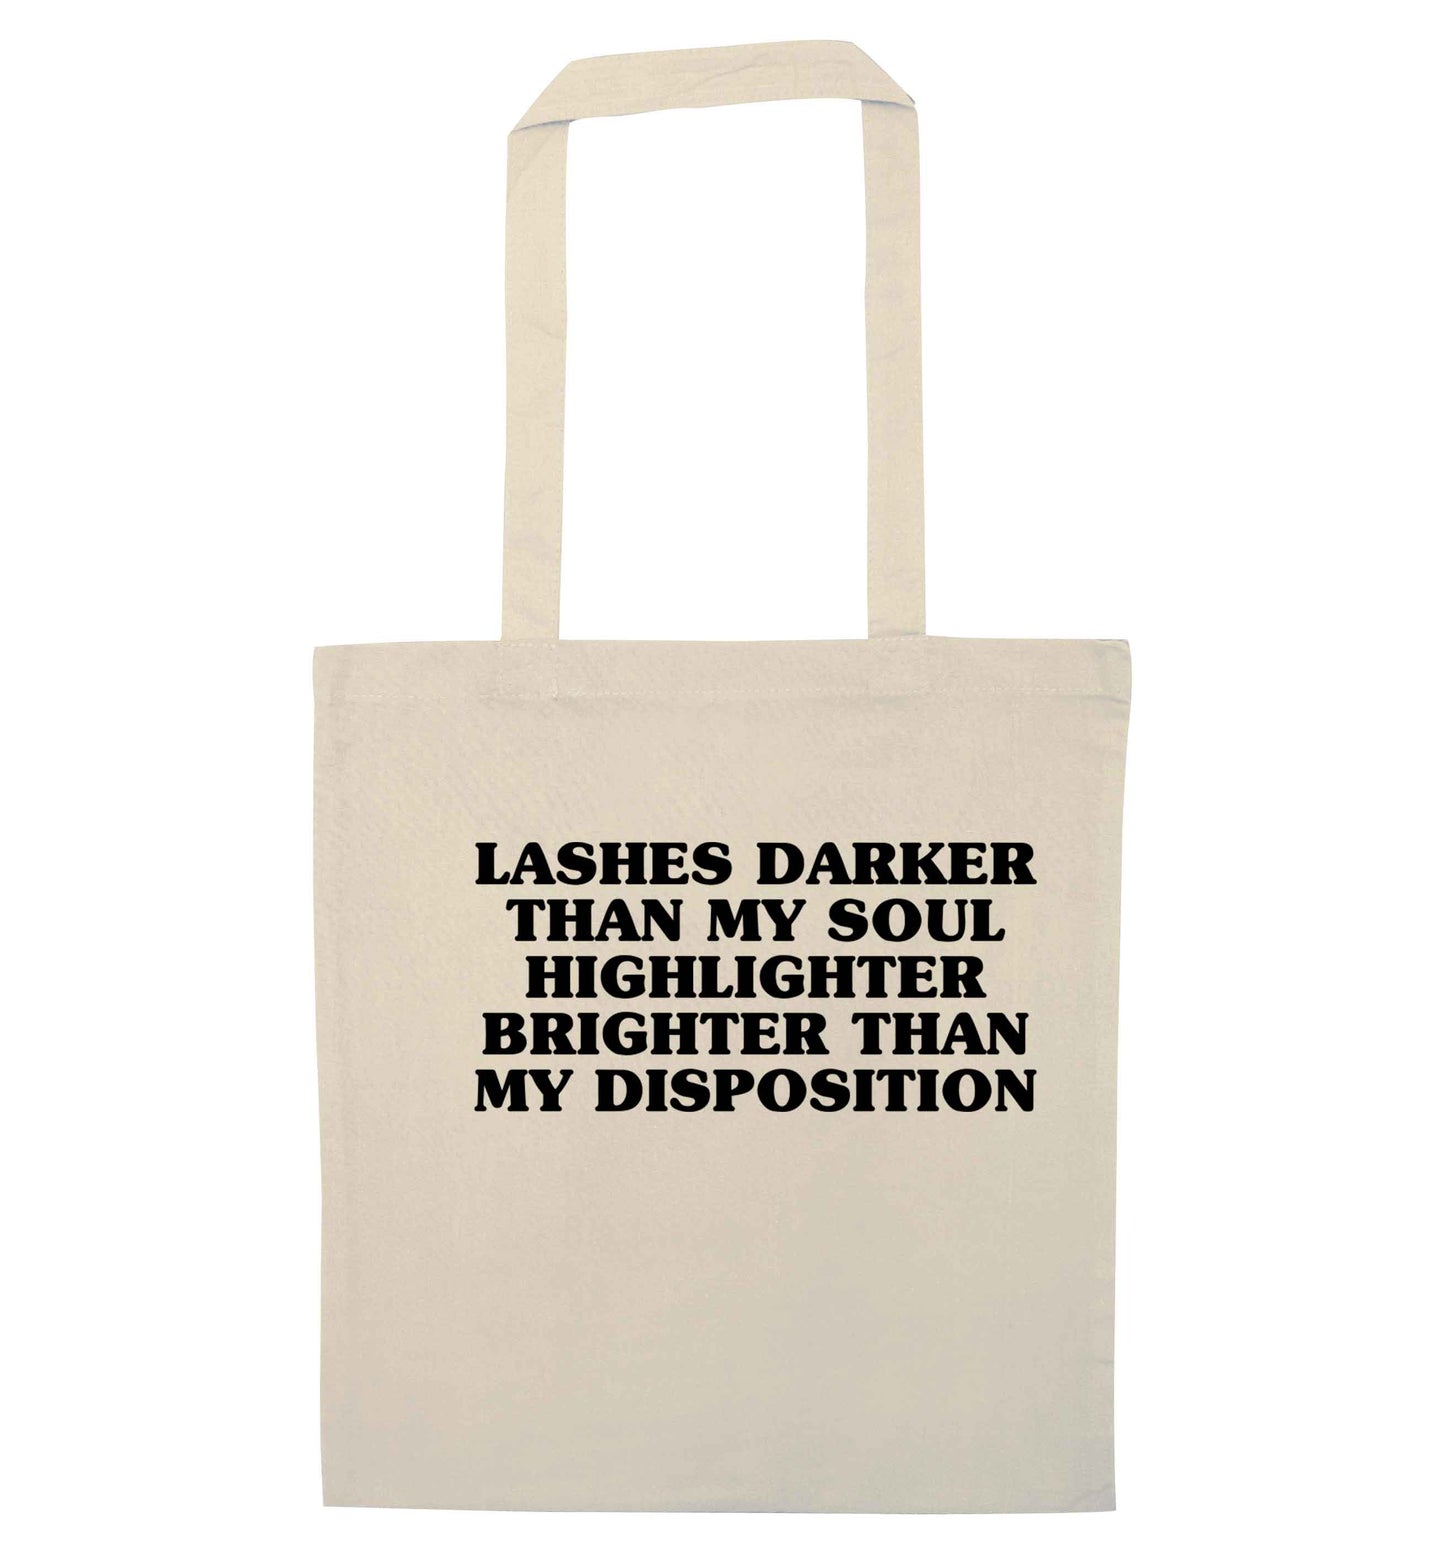 Lashes darker than my soul, highlighter brighter than my disposition natural tote bag